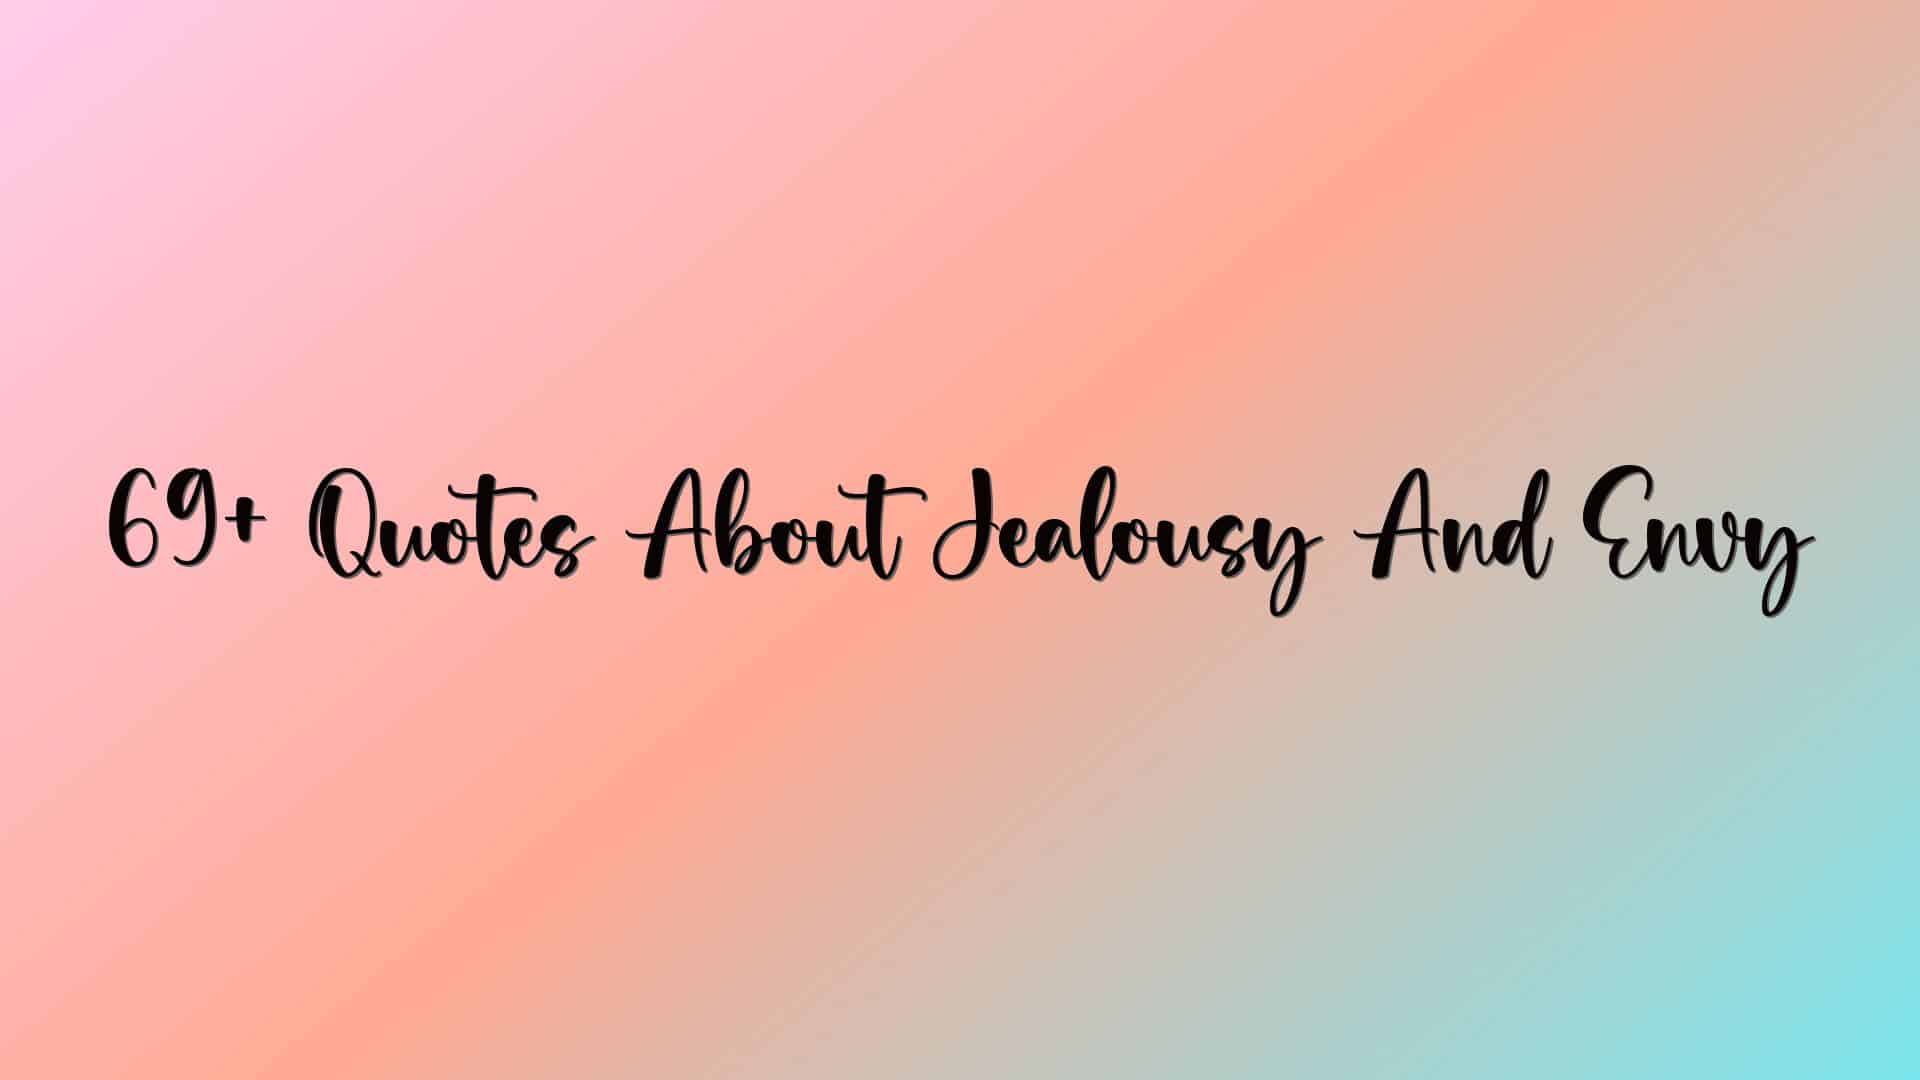 69+ Quotes About Jealousy And Envy